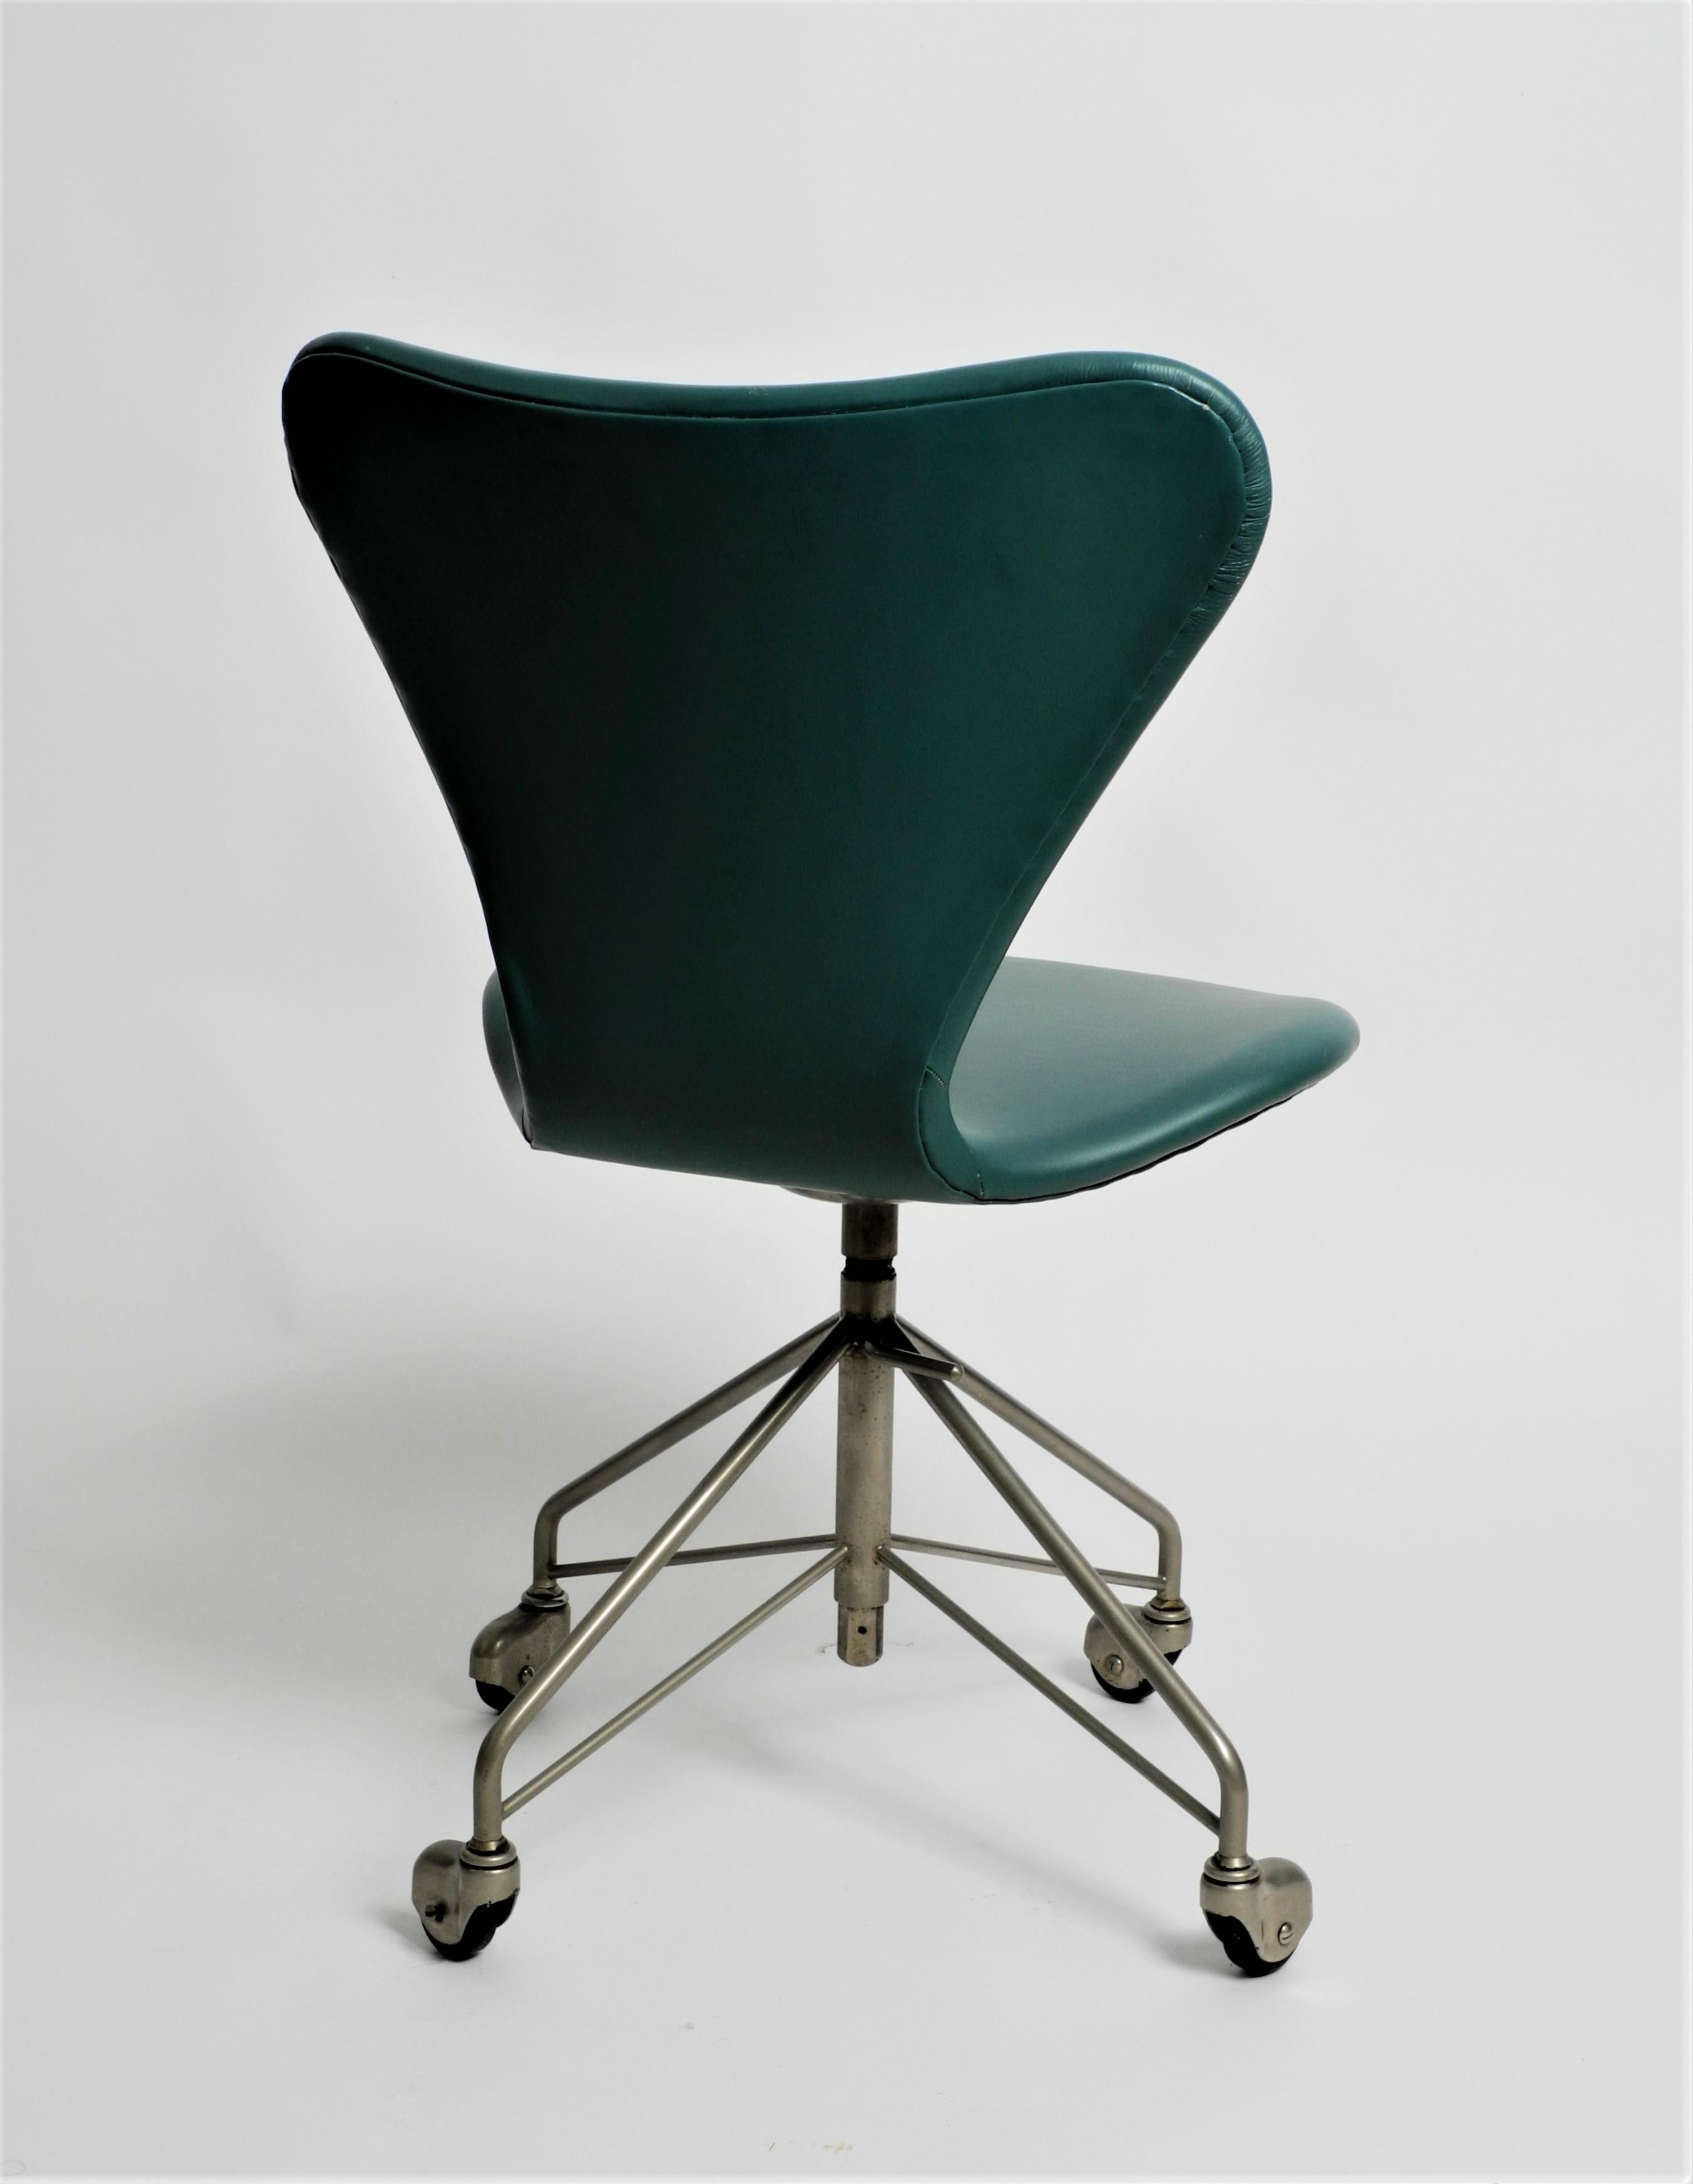 20th Century Early Arne Jacobsen 3117 Office Chair by Fritz Hansen Turqouise Faux Leather For Sale